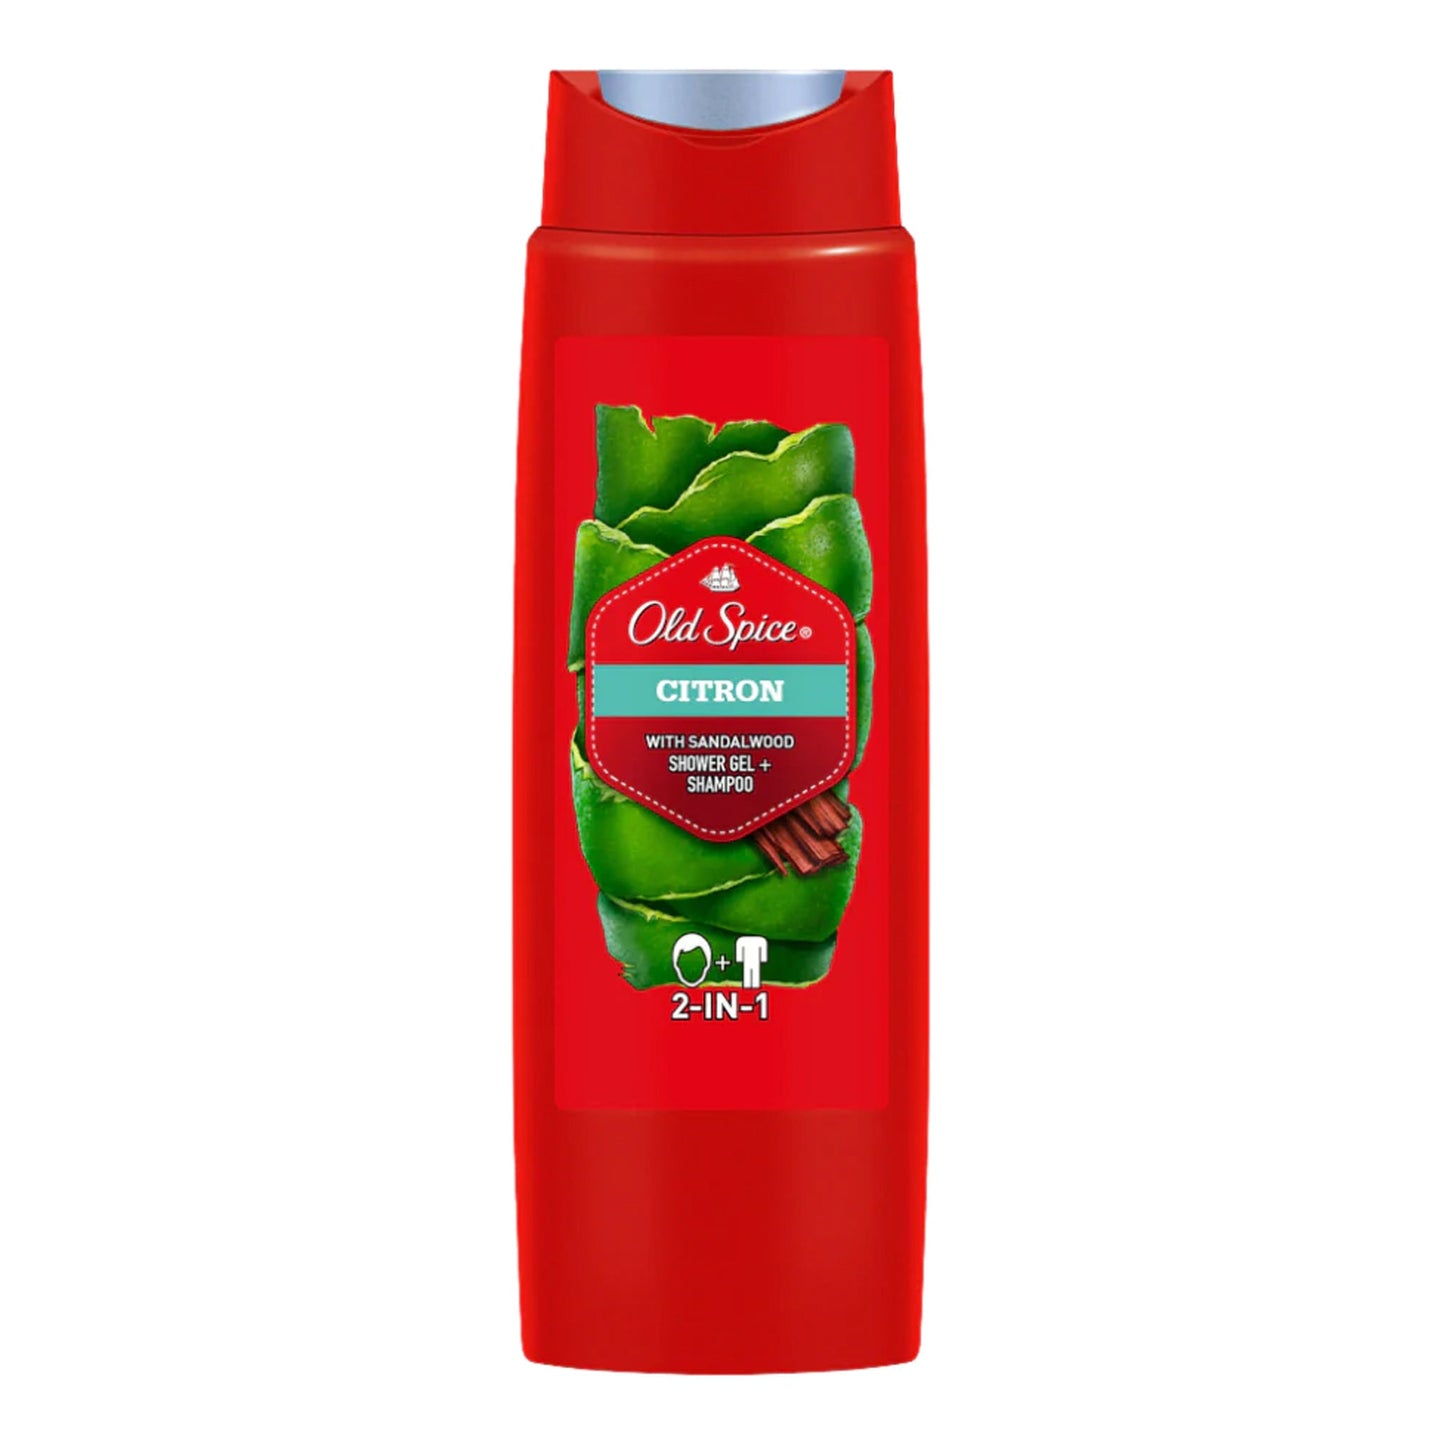 OLD SPICE - CITRON WITH SANDALWOOD SCENT SHOWER GEL + SHAMPOO - 400ML